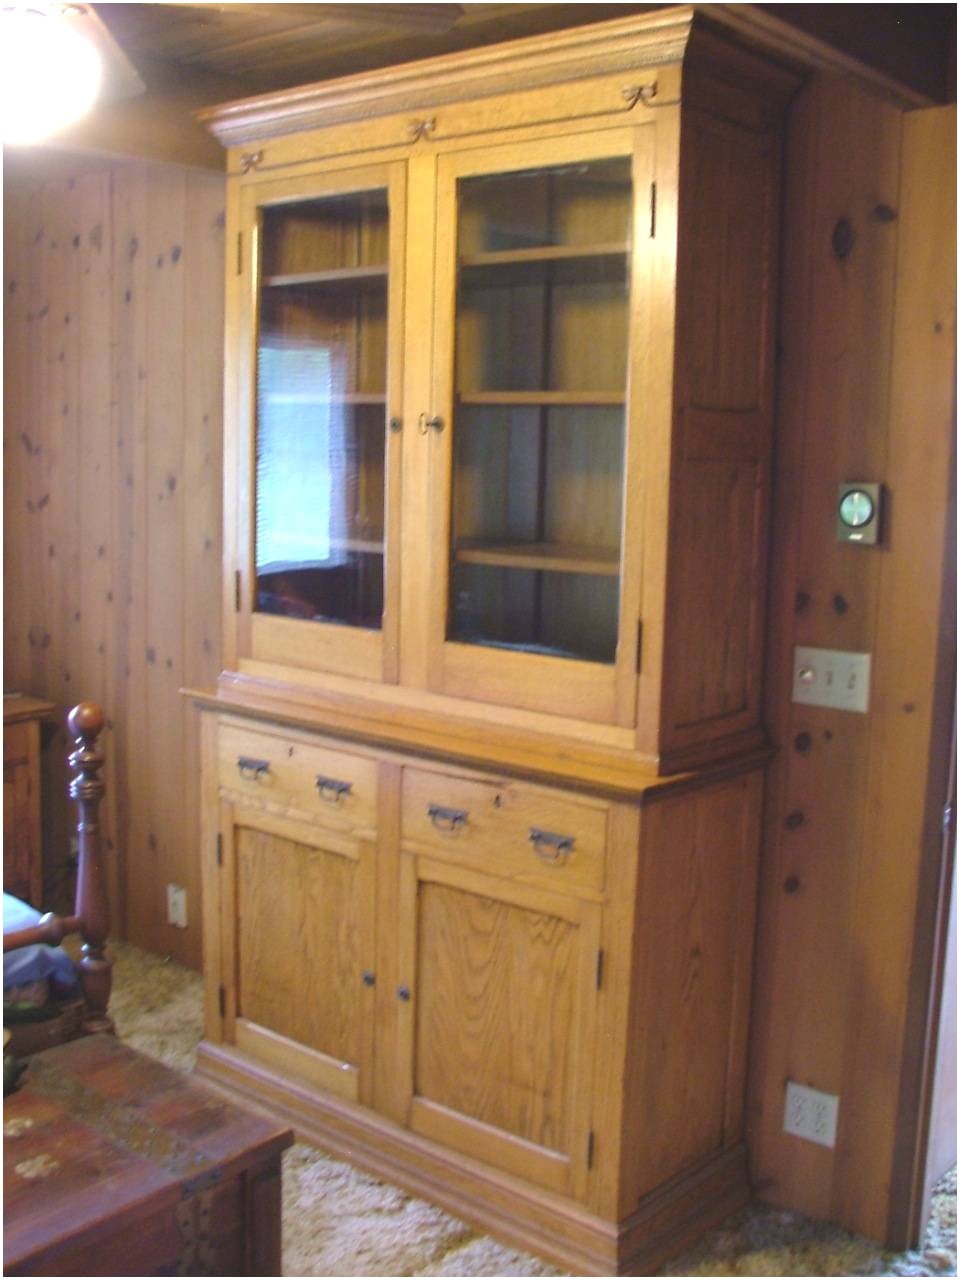 oak china cabinets for sale new sideboards astonishing oak china cabinets for sale antique oak china